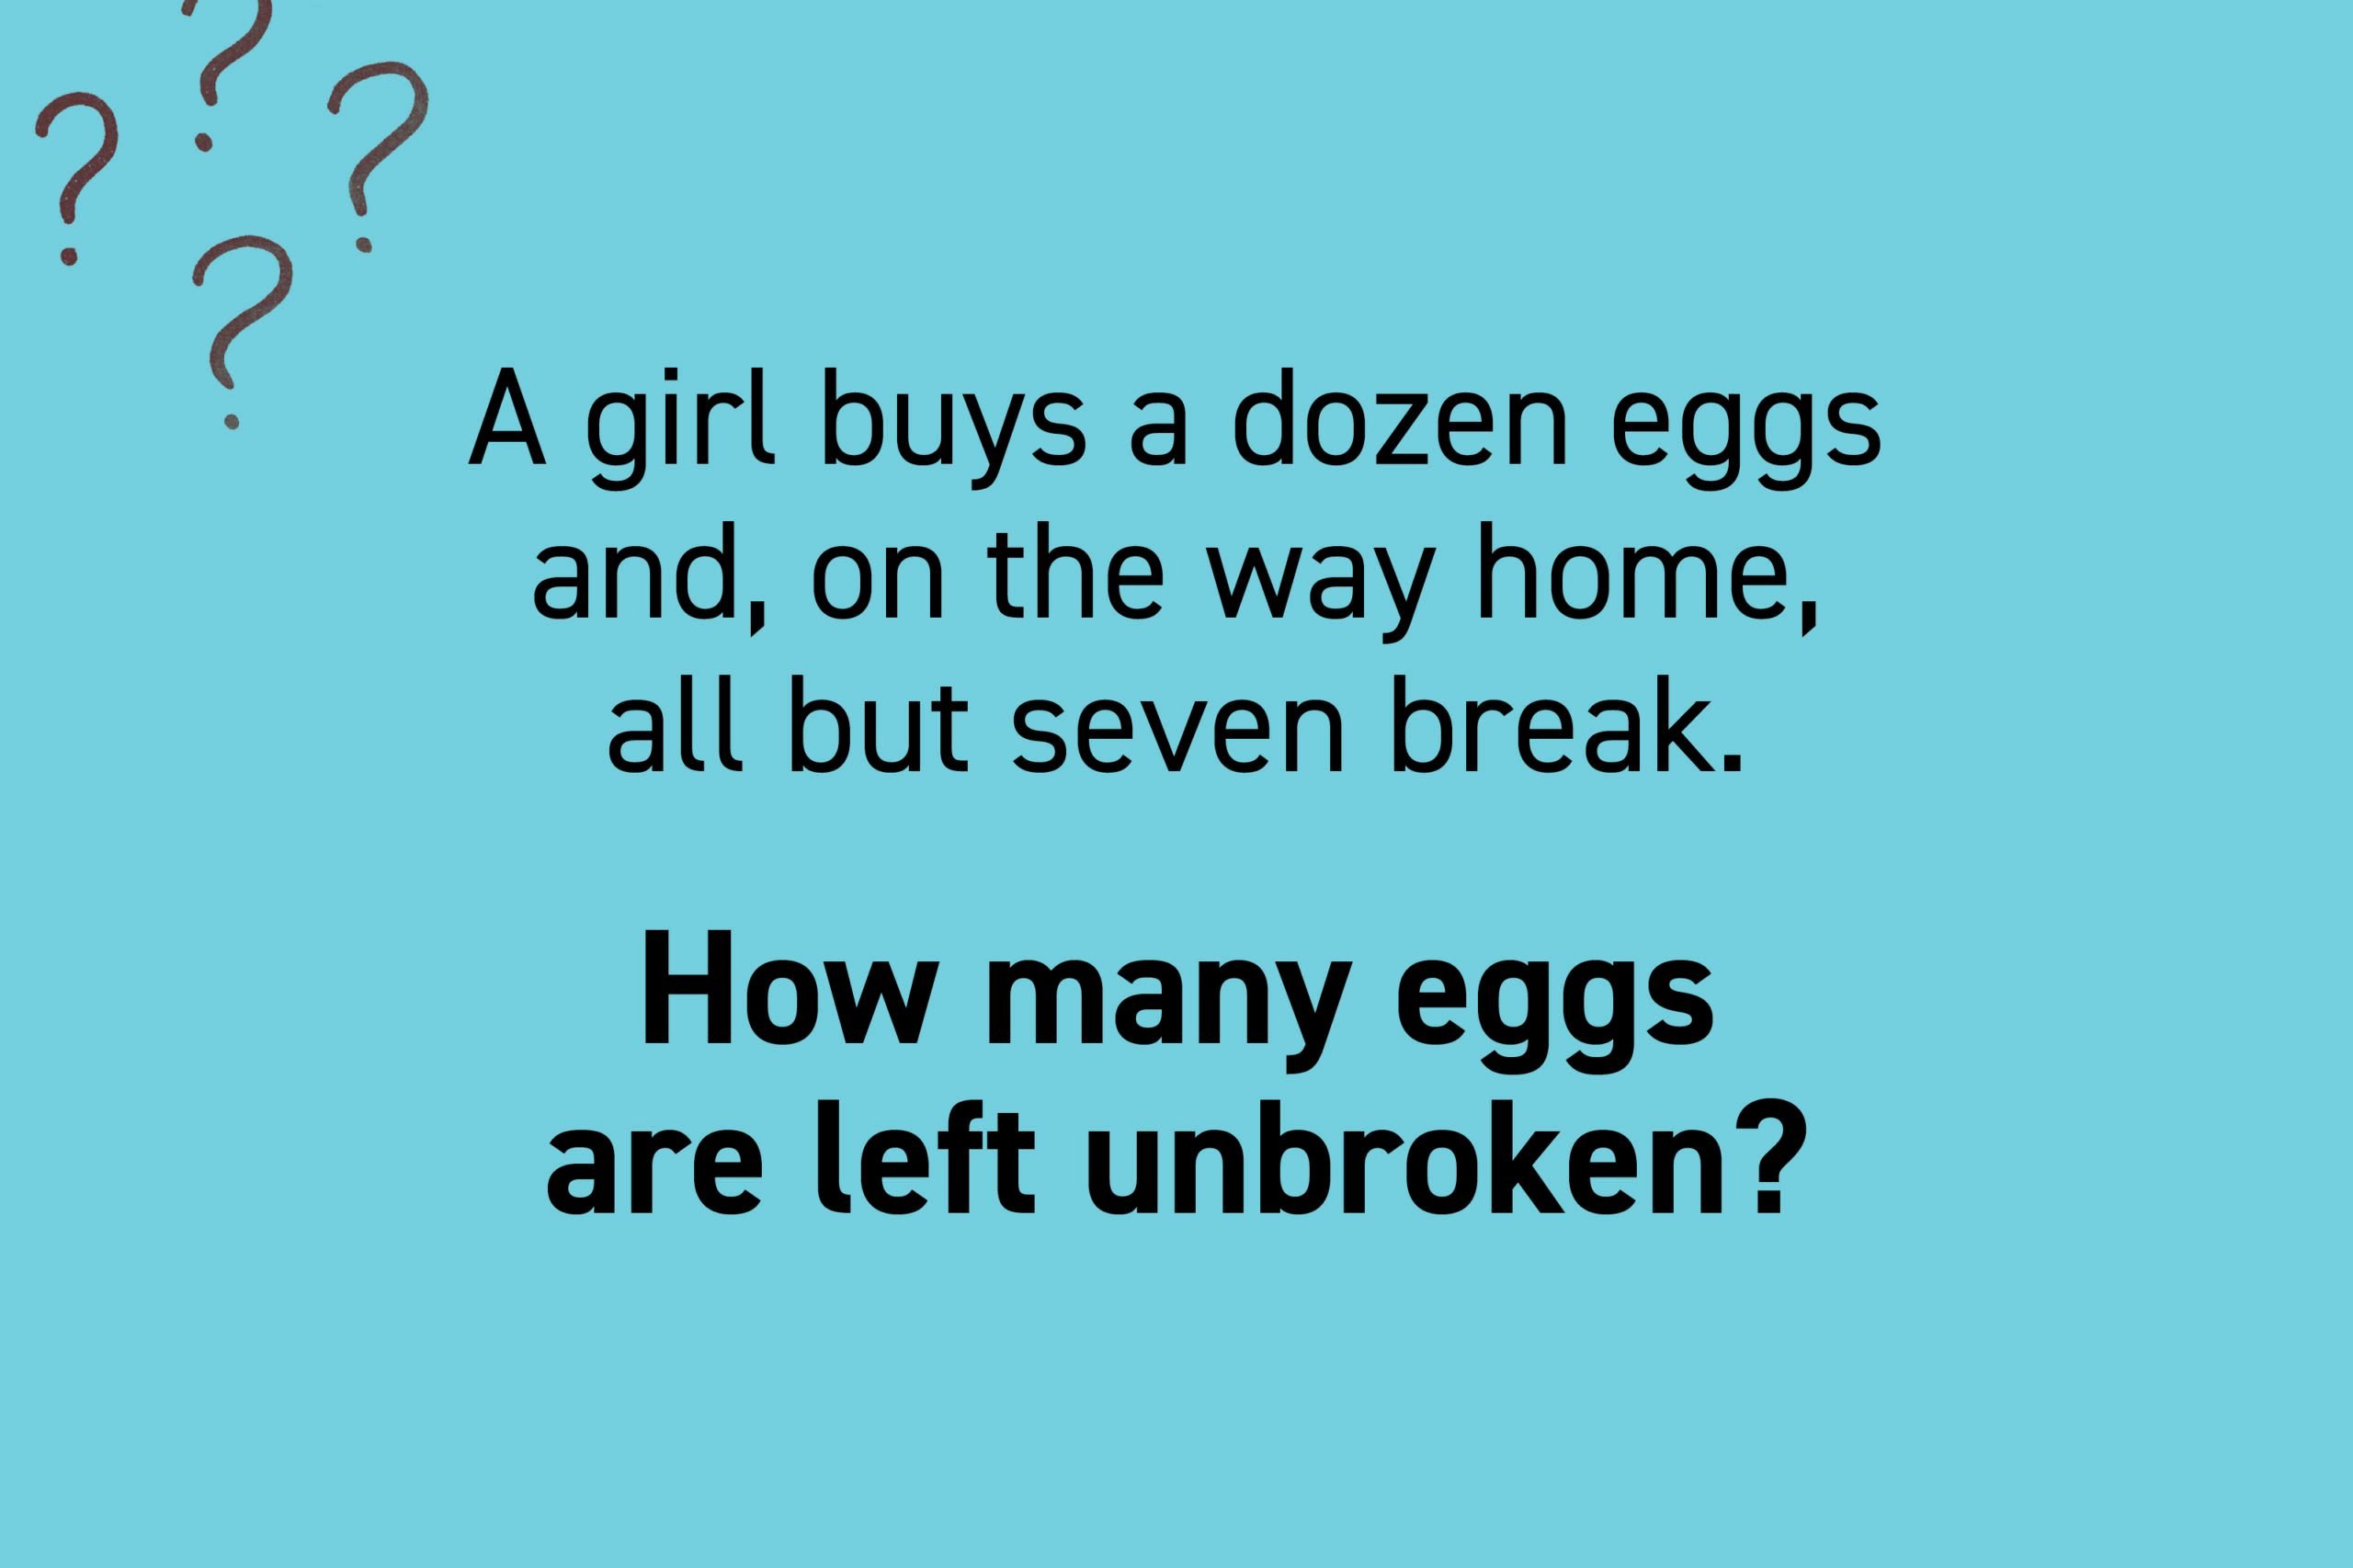 A girl buys a dozen eggs and, on the way home, all but seven break. How many eggs are left unbroken?